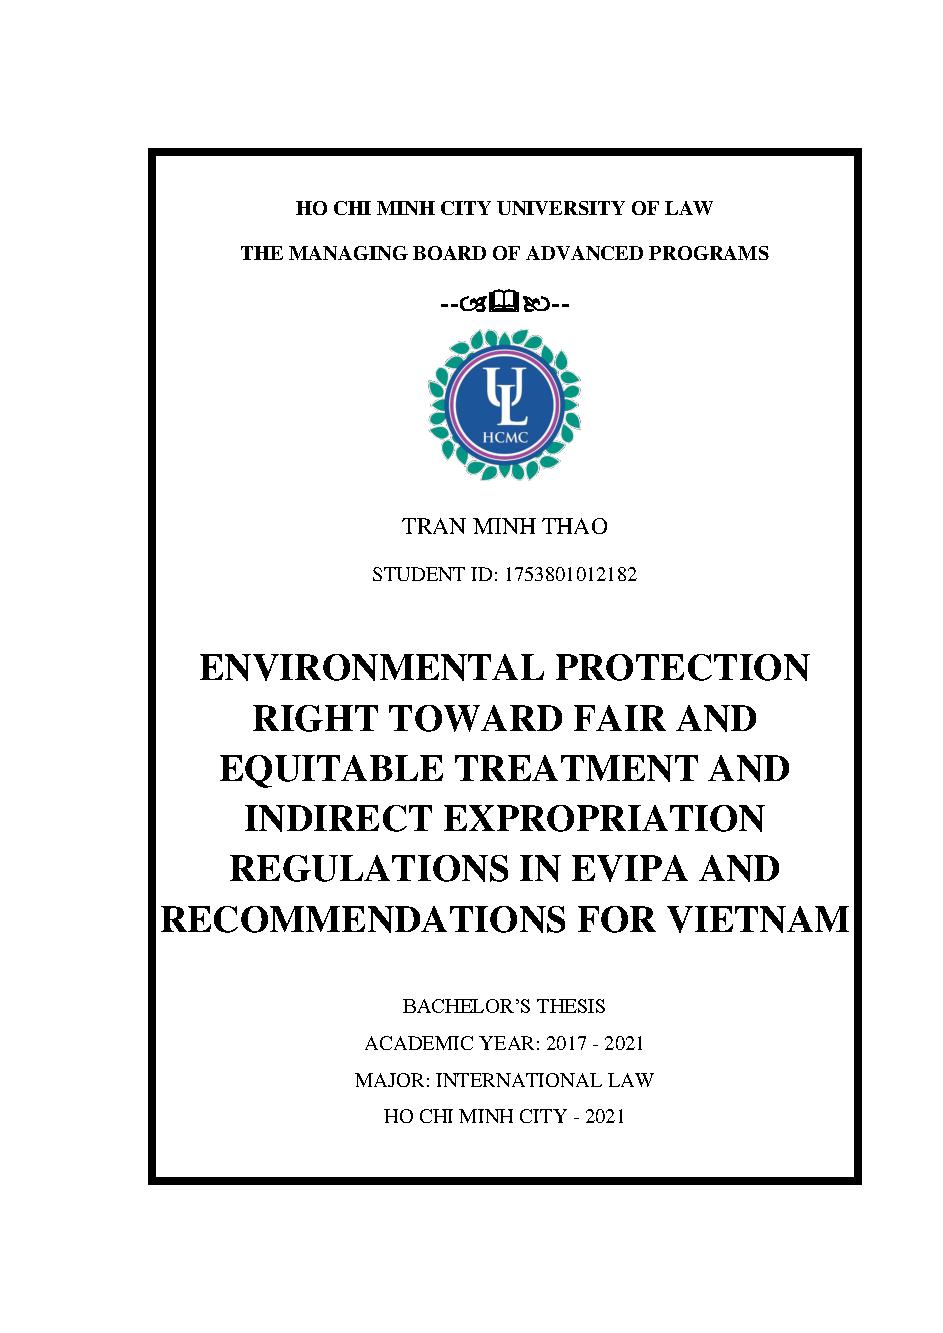 Environmental Protection Right toward Fair and Equitable Treatment and Indirect Expropriation regulations in EVIPA and Recommendations for VietNam